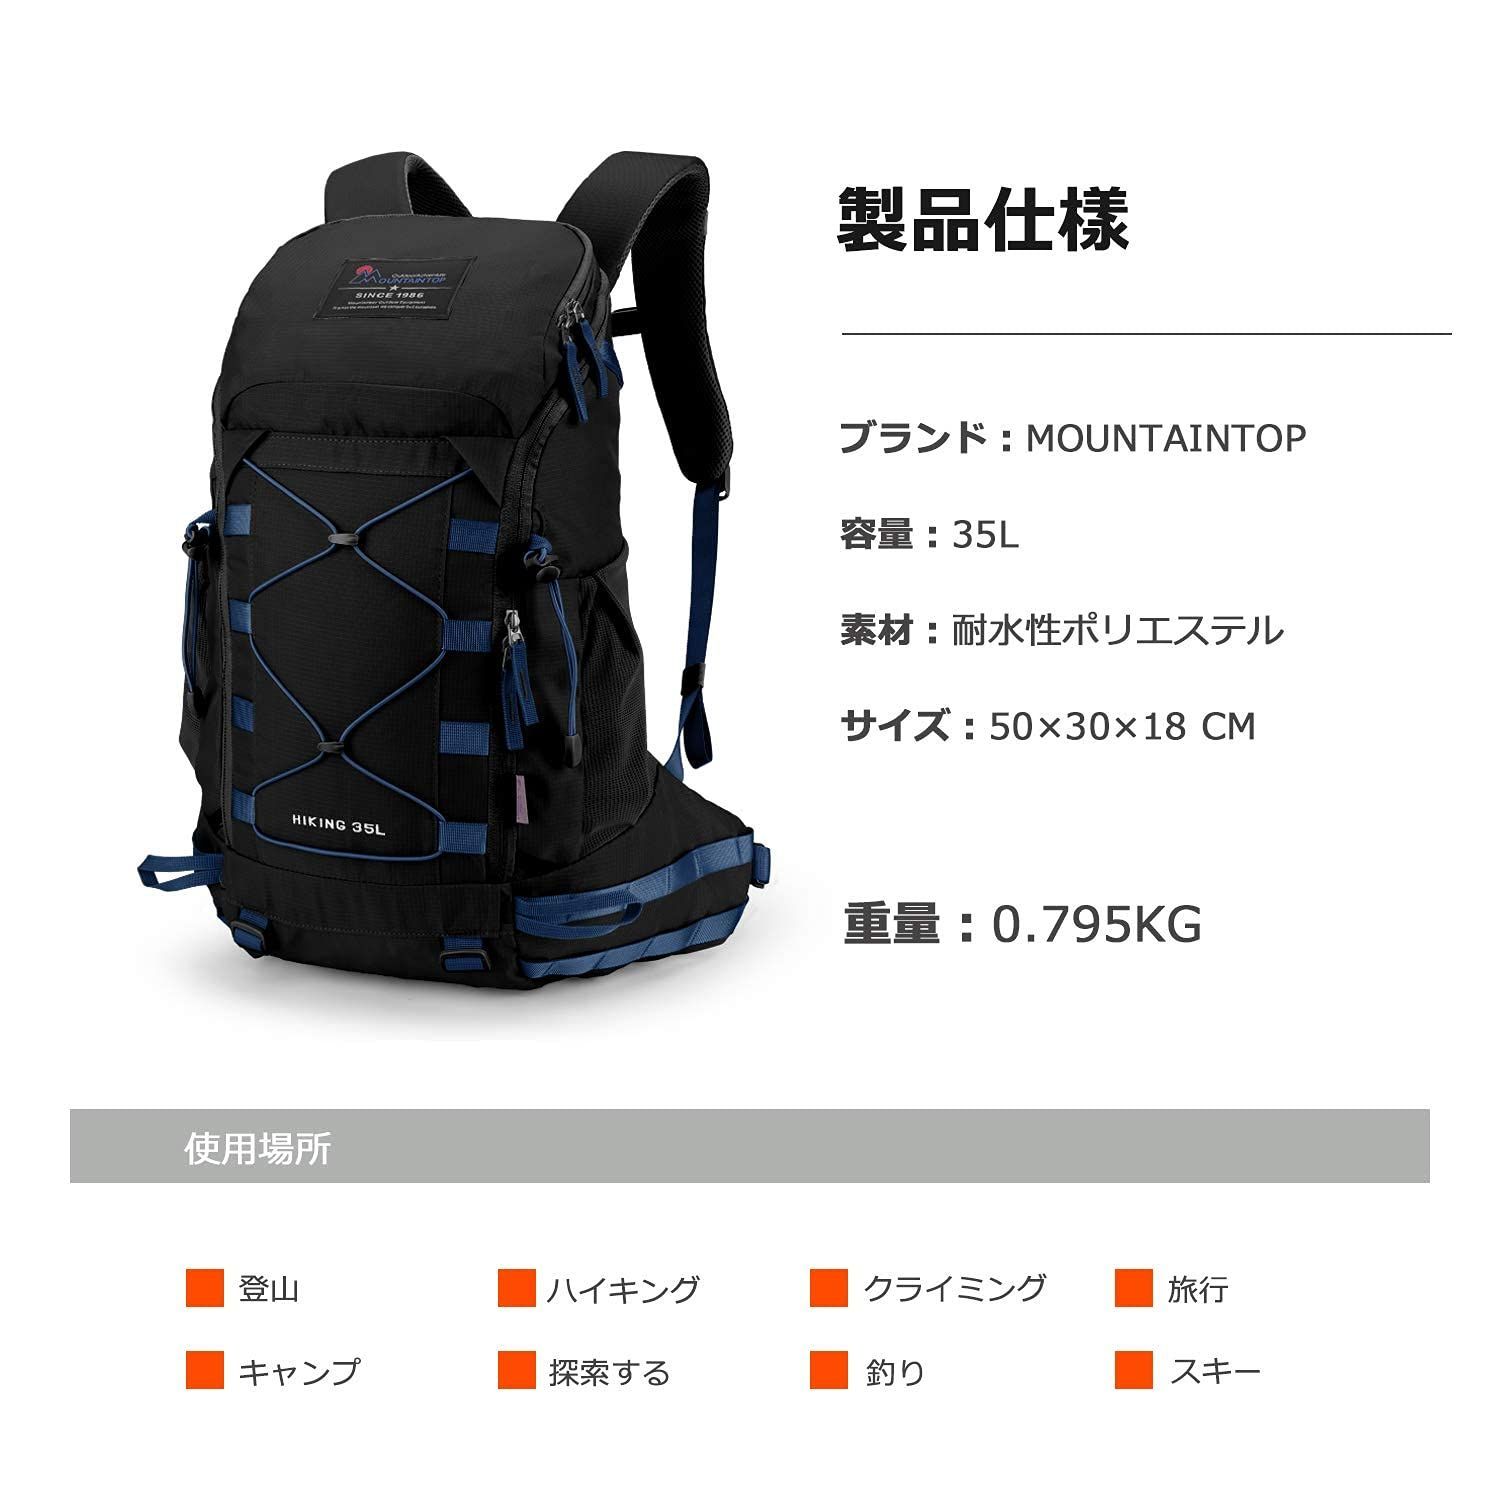 MOUNTAINTOP 35L ハイキング キャンプ 旅行用バックパック レイン